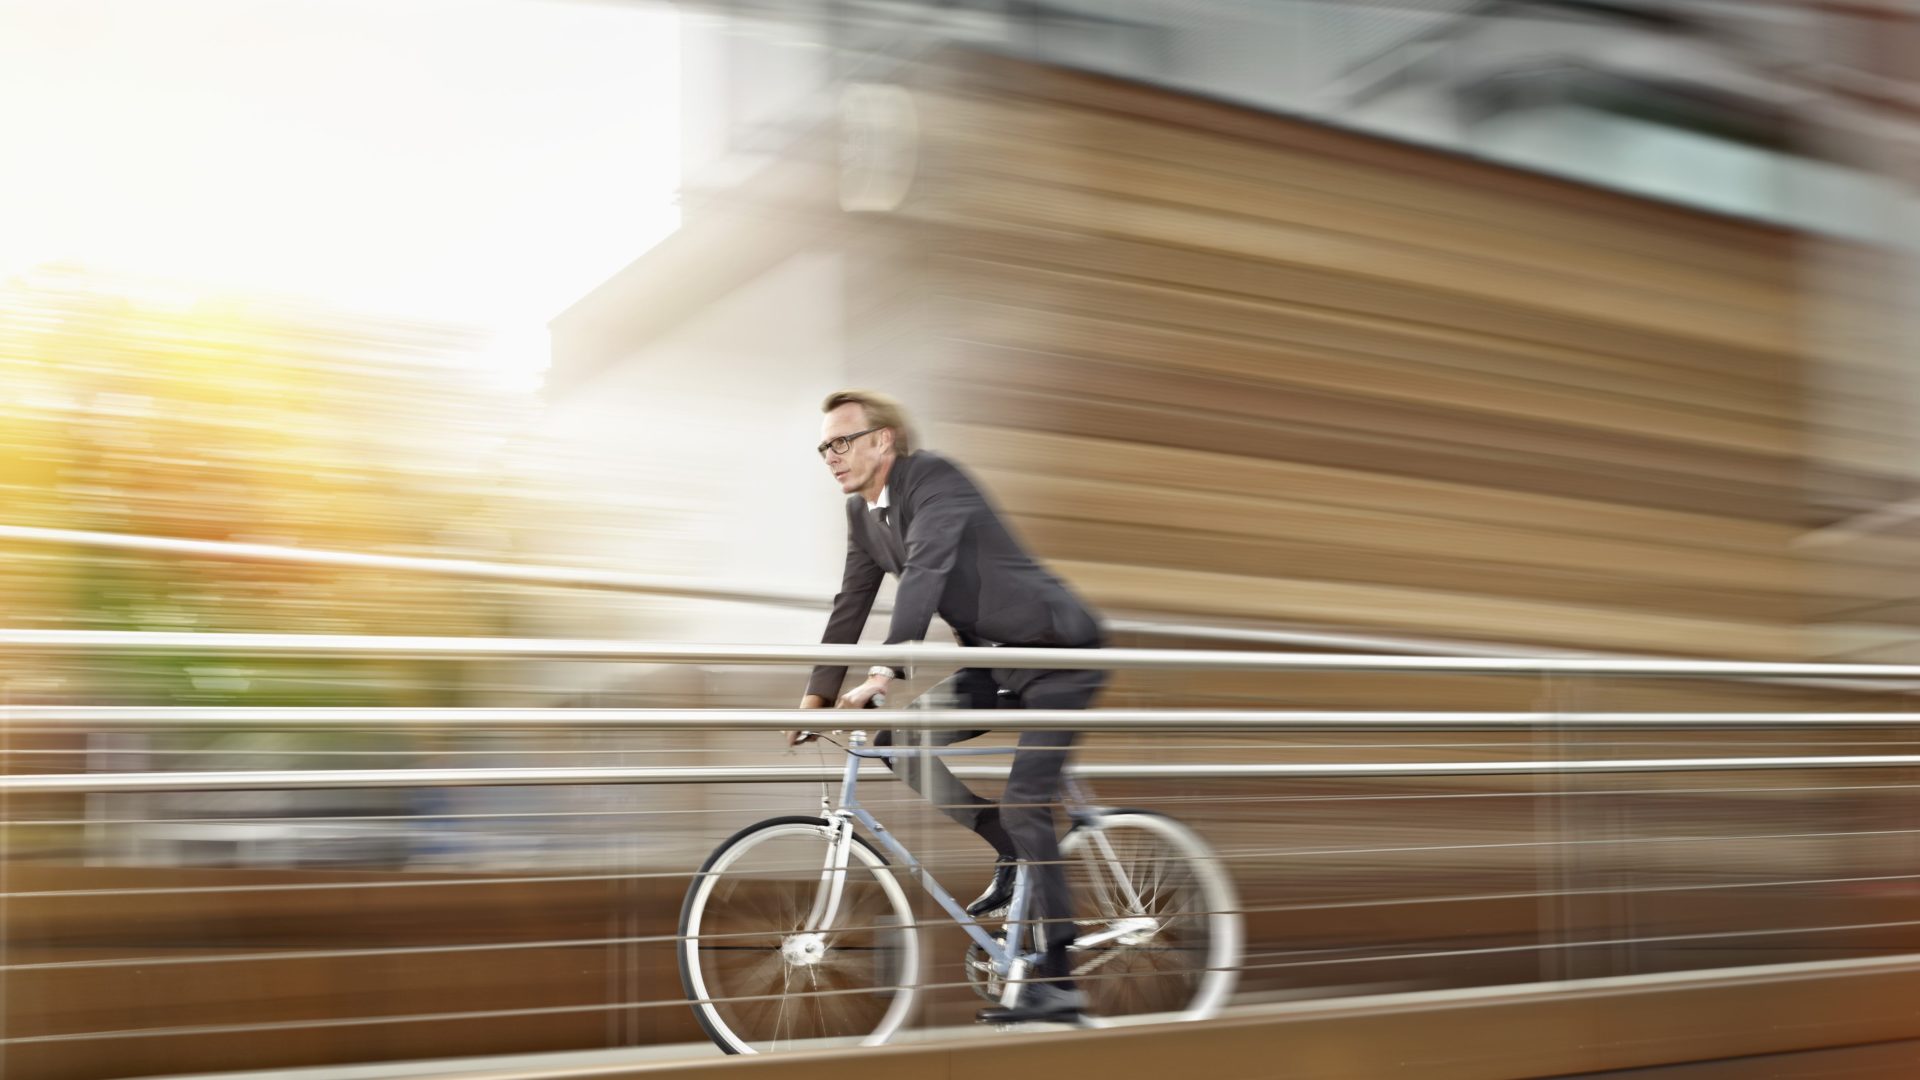 Bike is increasingly seen by companies as a sustainable method of transport